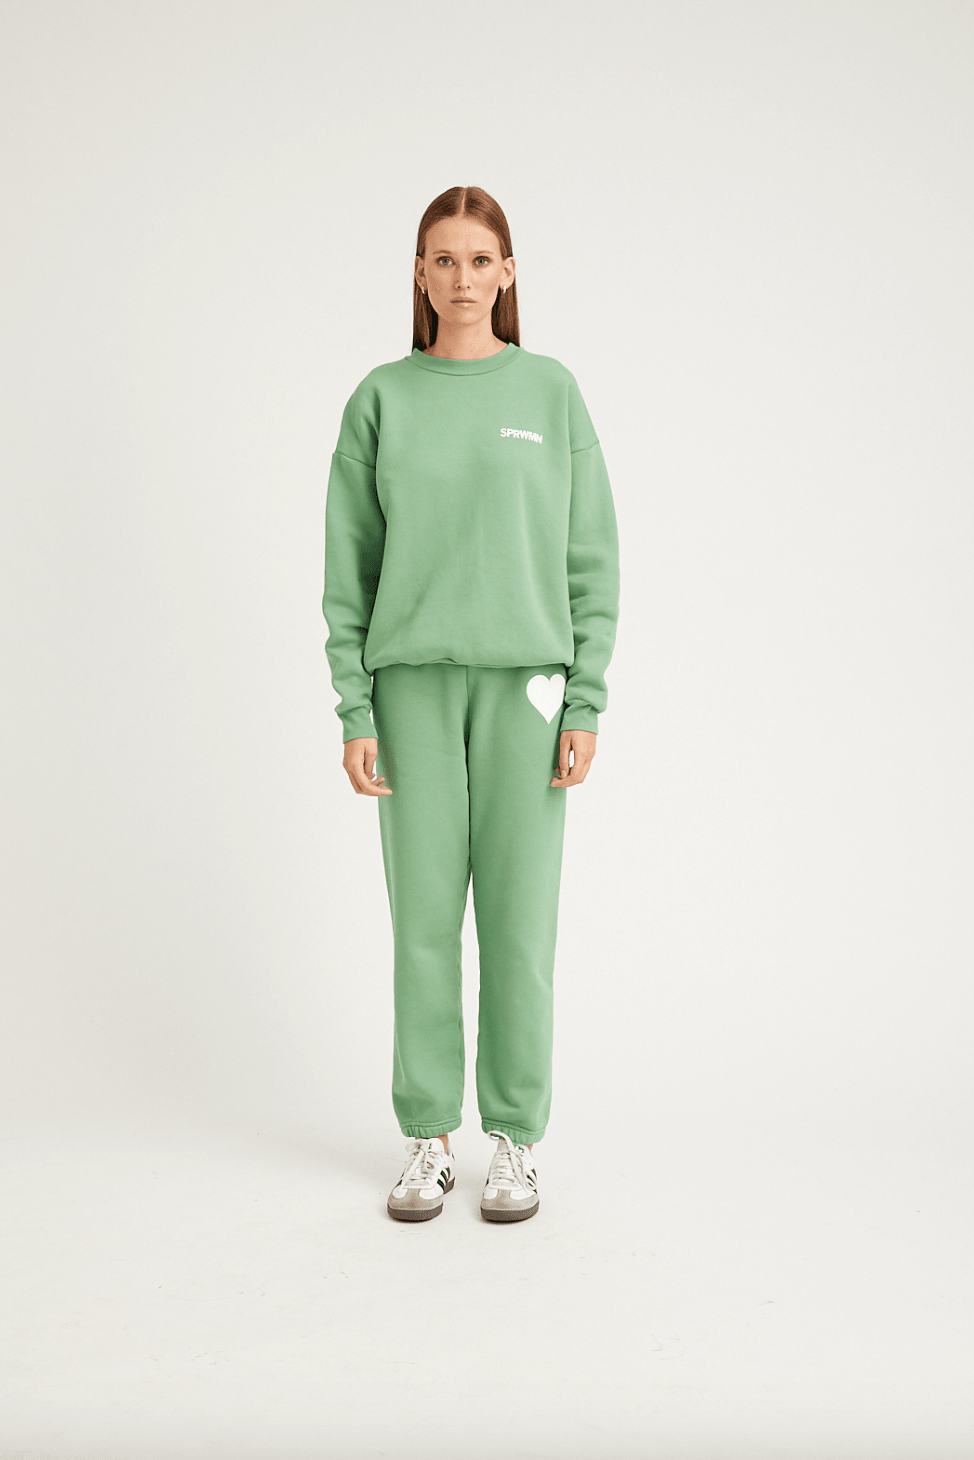 Heart Sweatpant in Evergreen by SPRWMN - Haven